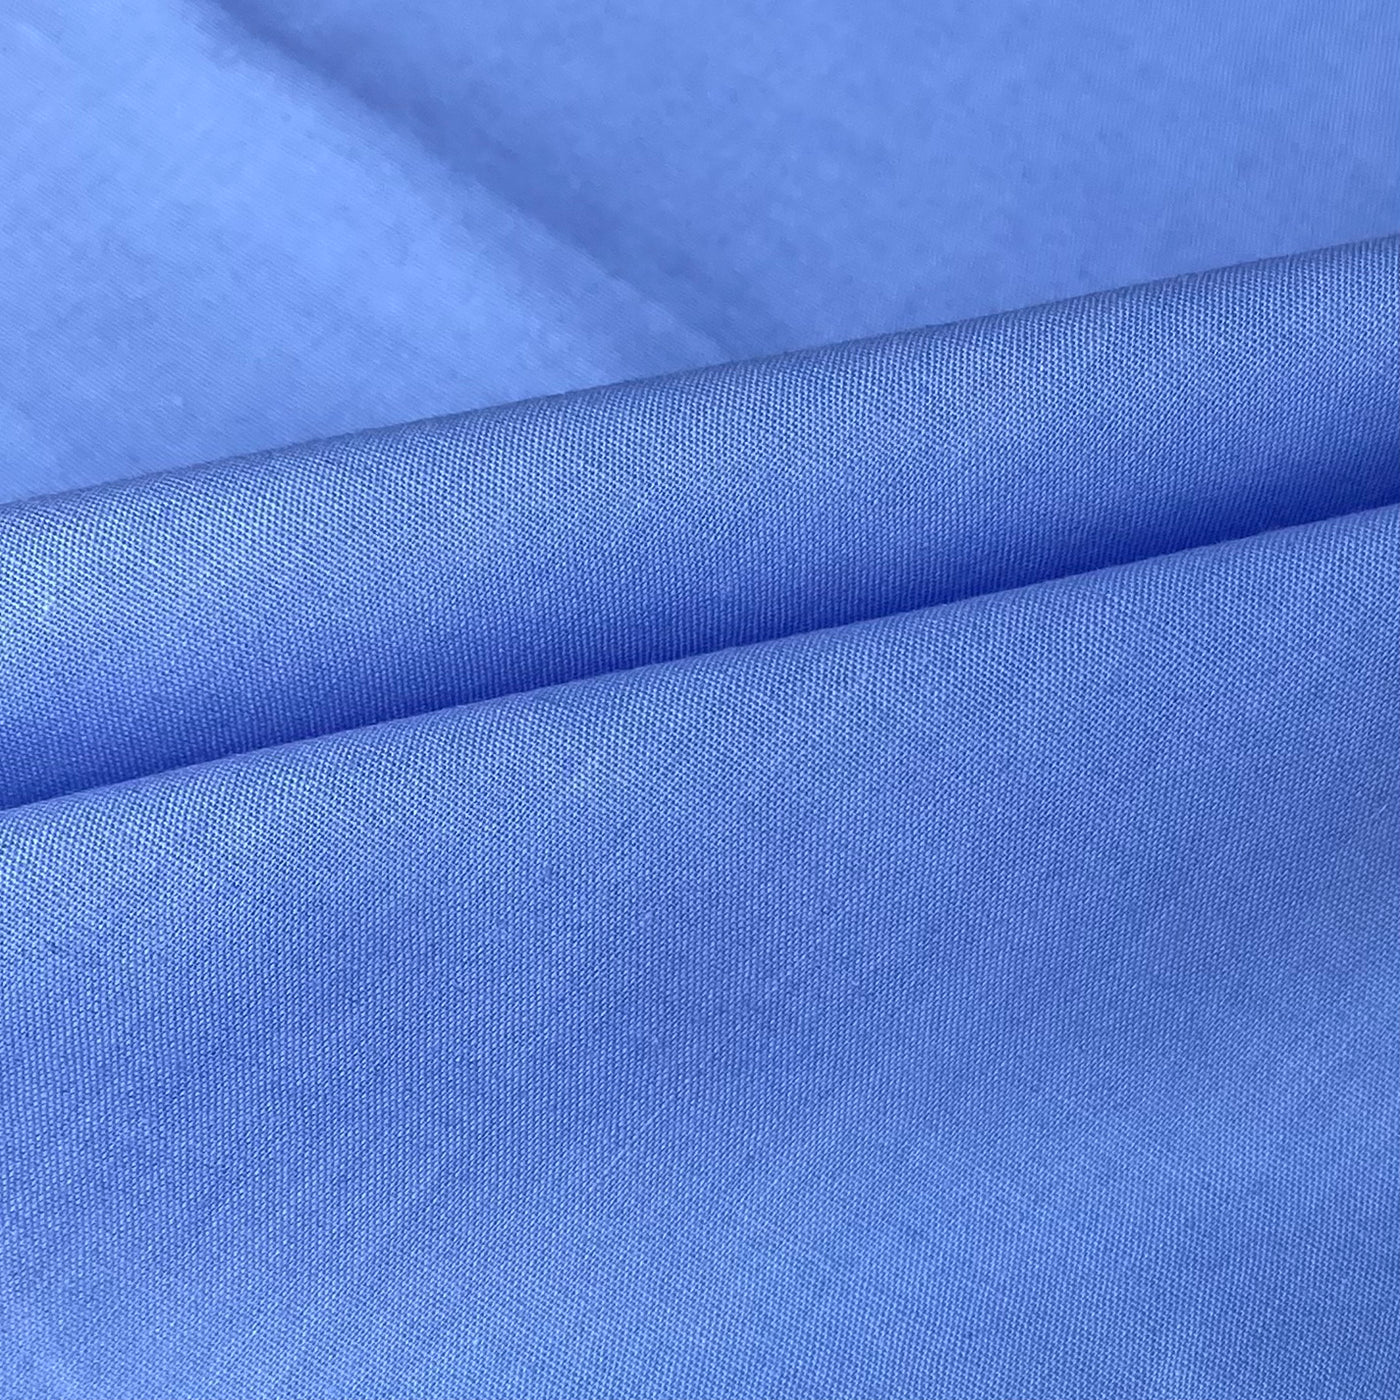 Baby Blue Polyester Cotton Broadcloth Fabric